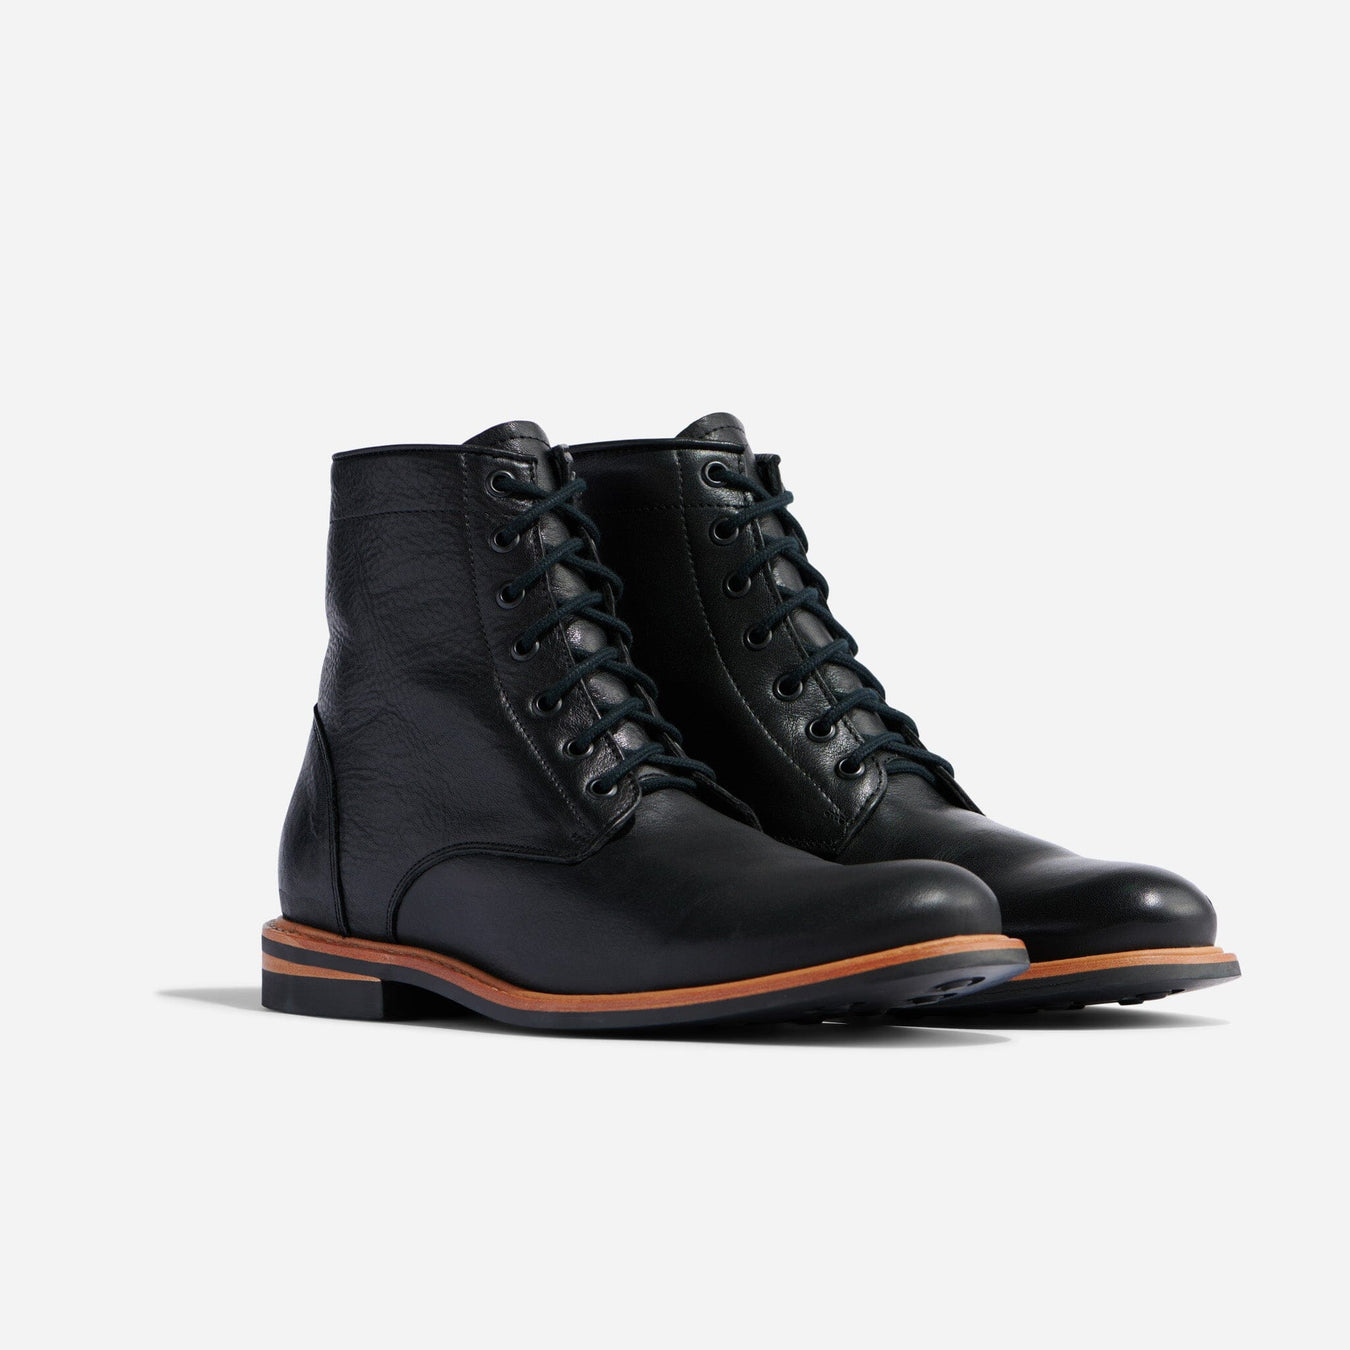 All-Weather Andres Boot